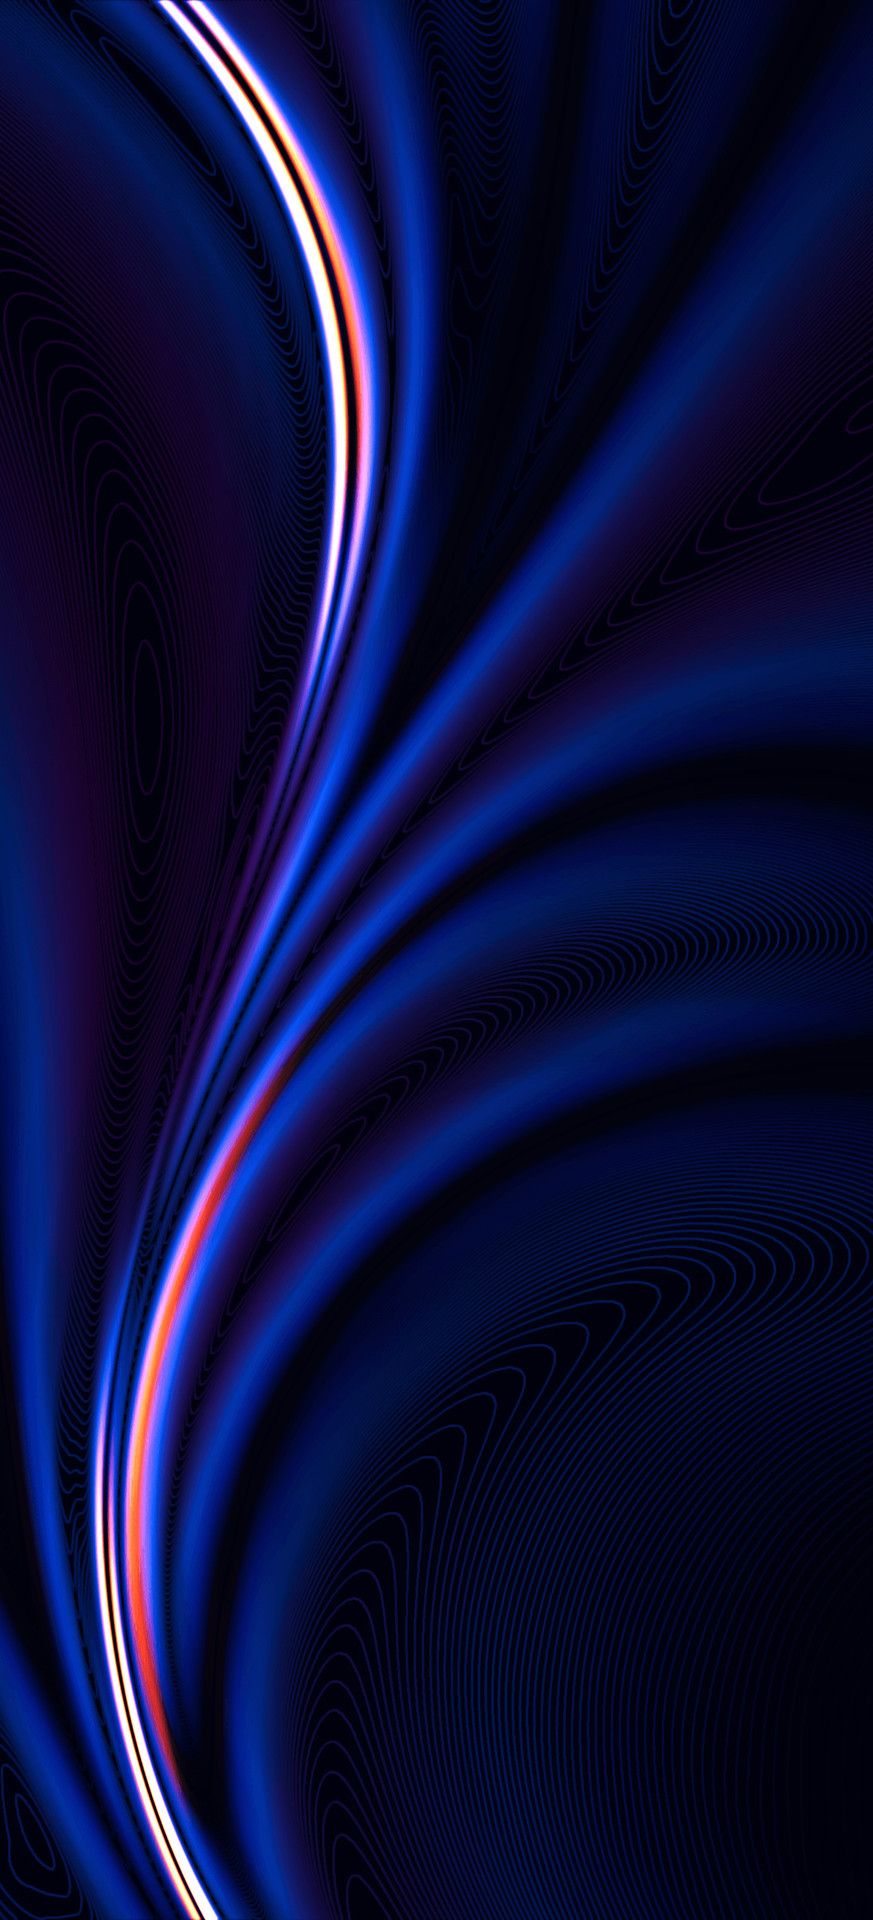 Download the OnePlus 8 official wallpaper now